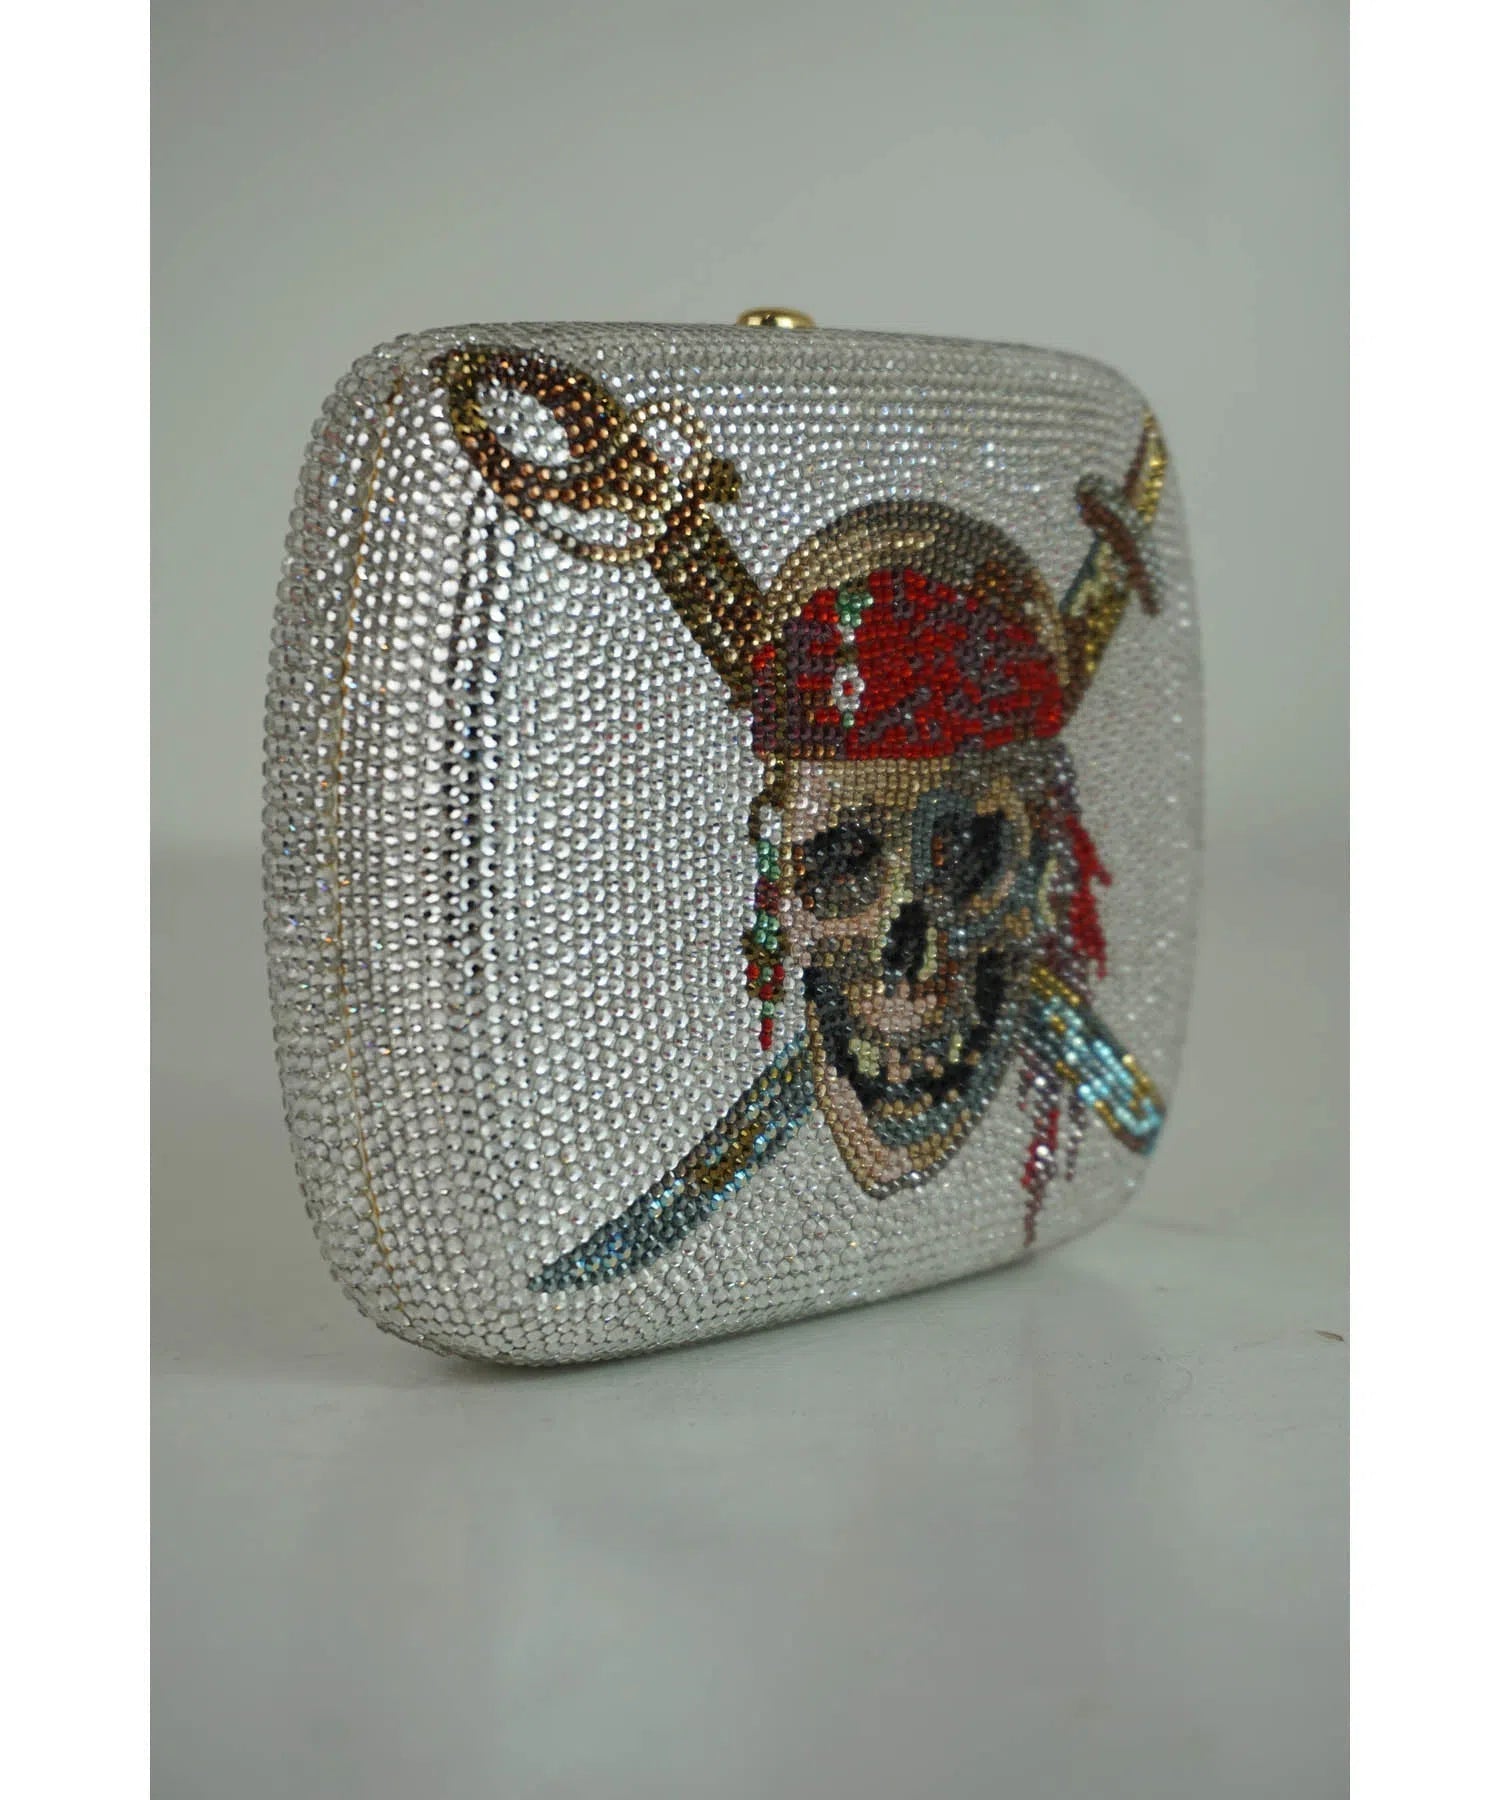 Judith Leiber "Dead Man's Chest" Pirates of the Caribbean Crystal Minaudiere